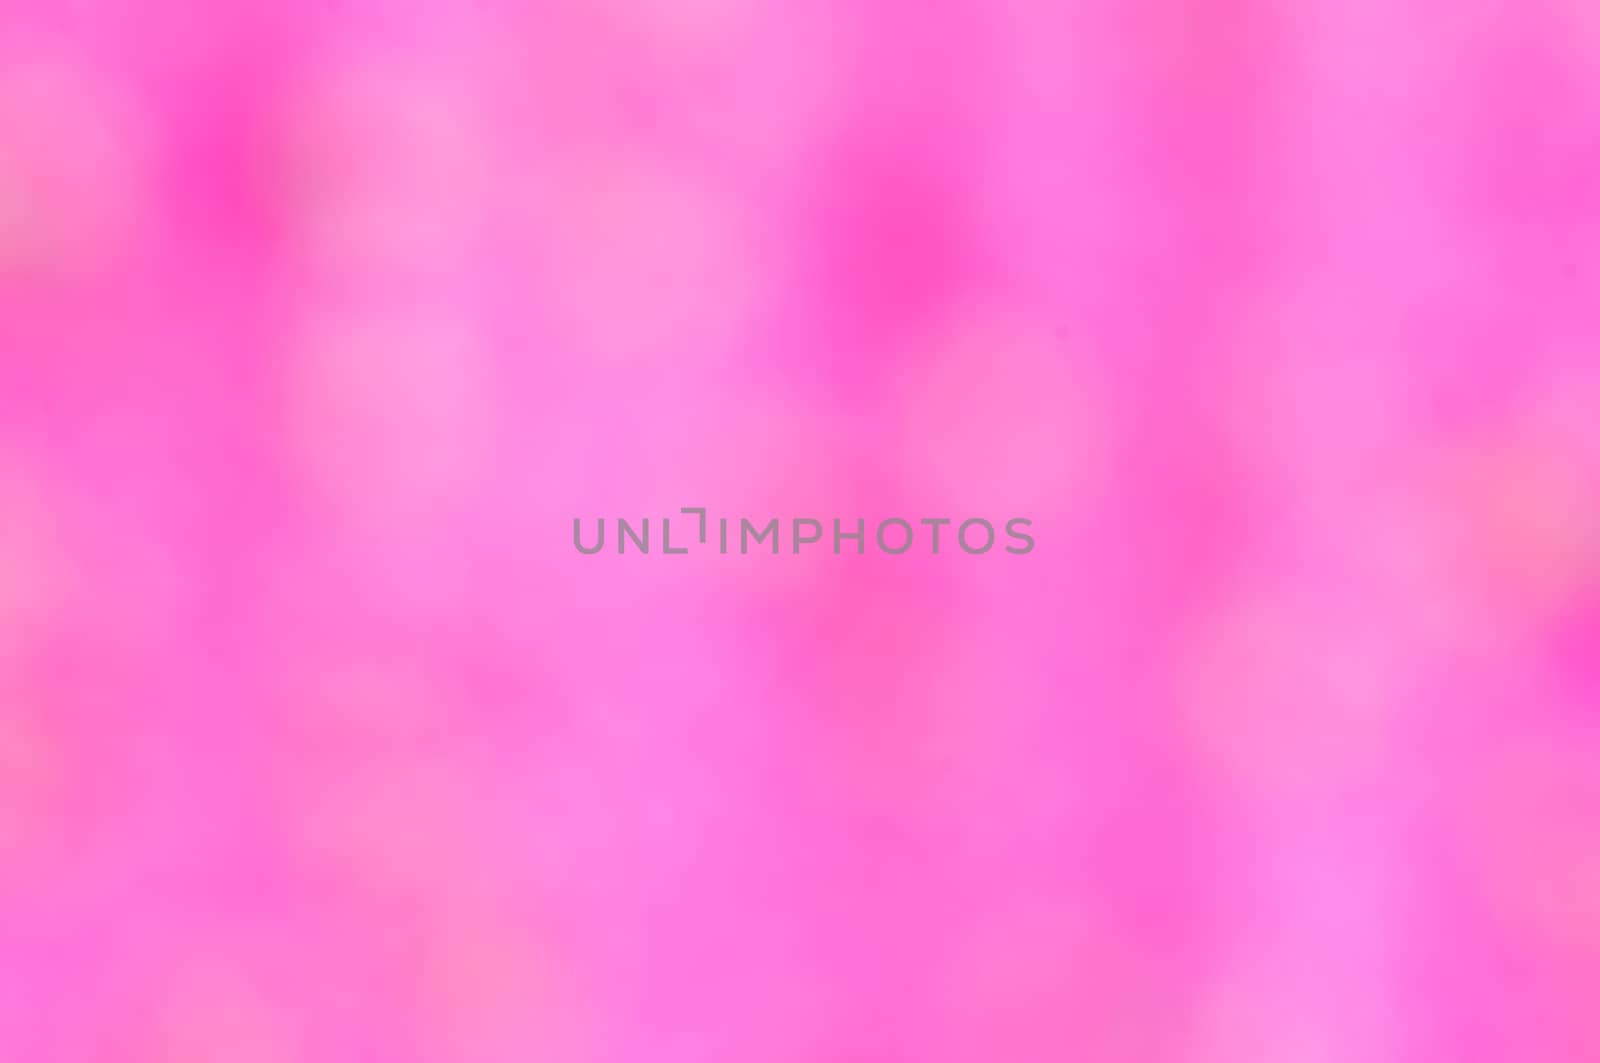 Pink bokeh  and blur background